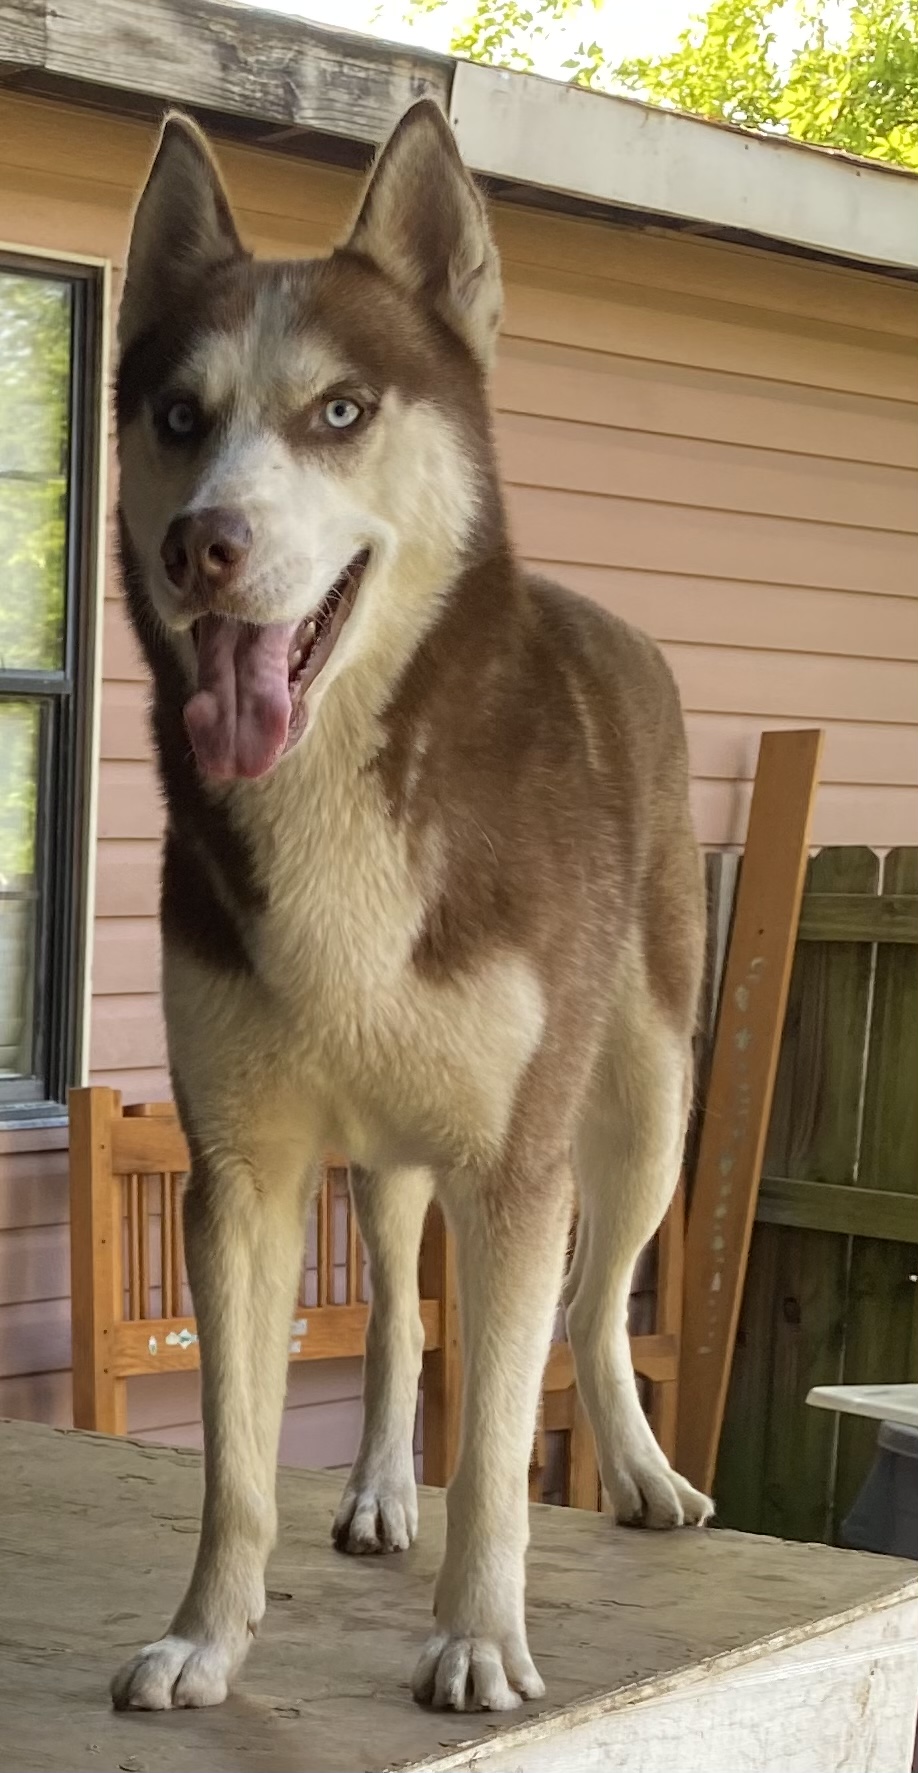 Image of oakley, Lost Dog